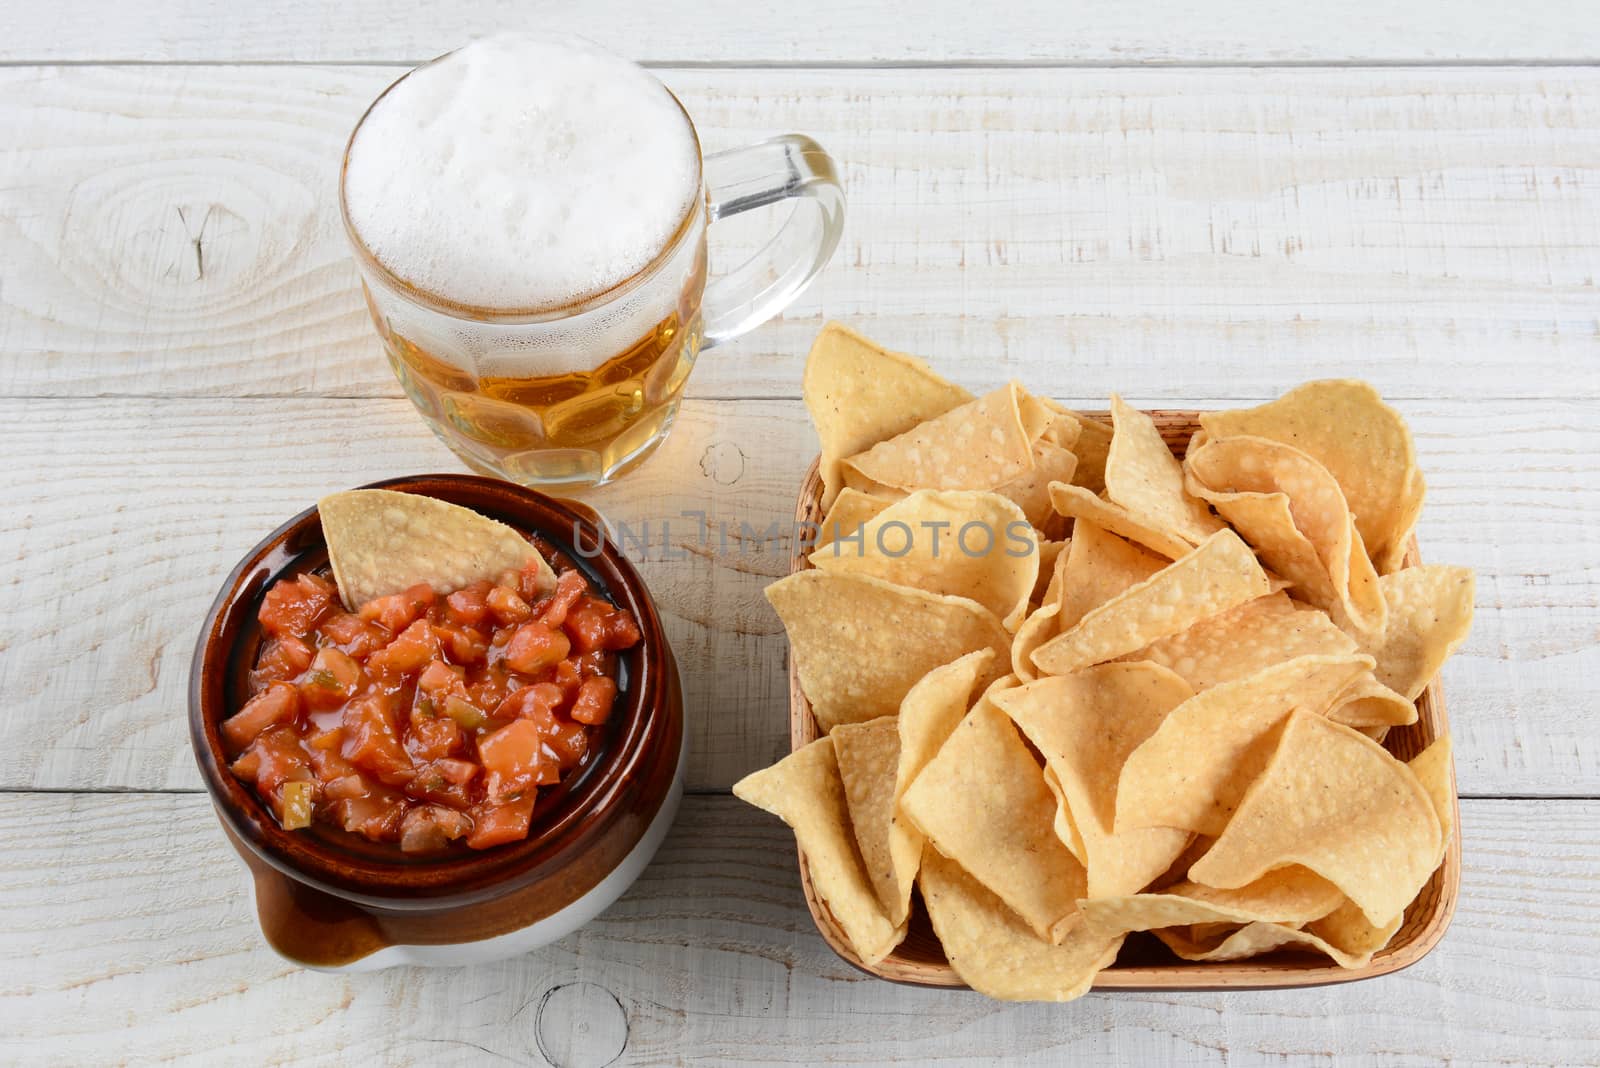 Beer, Chips and Salsa by sCukrov